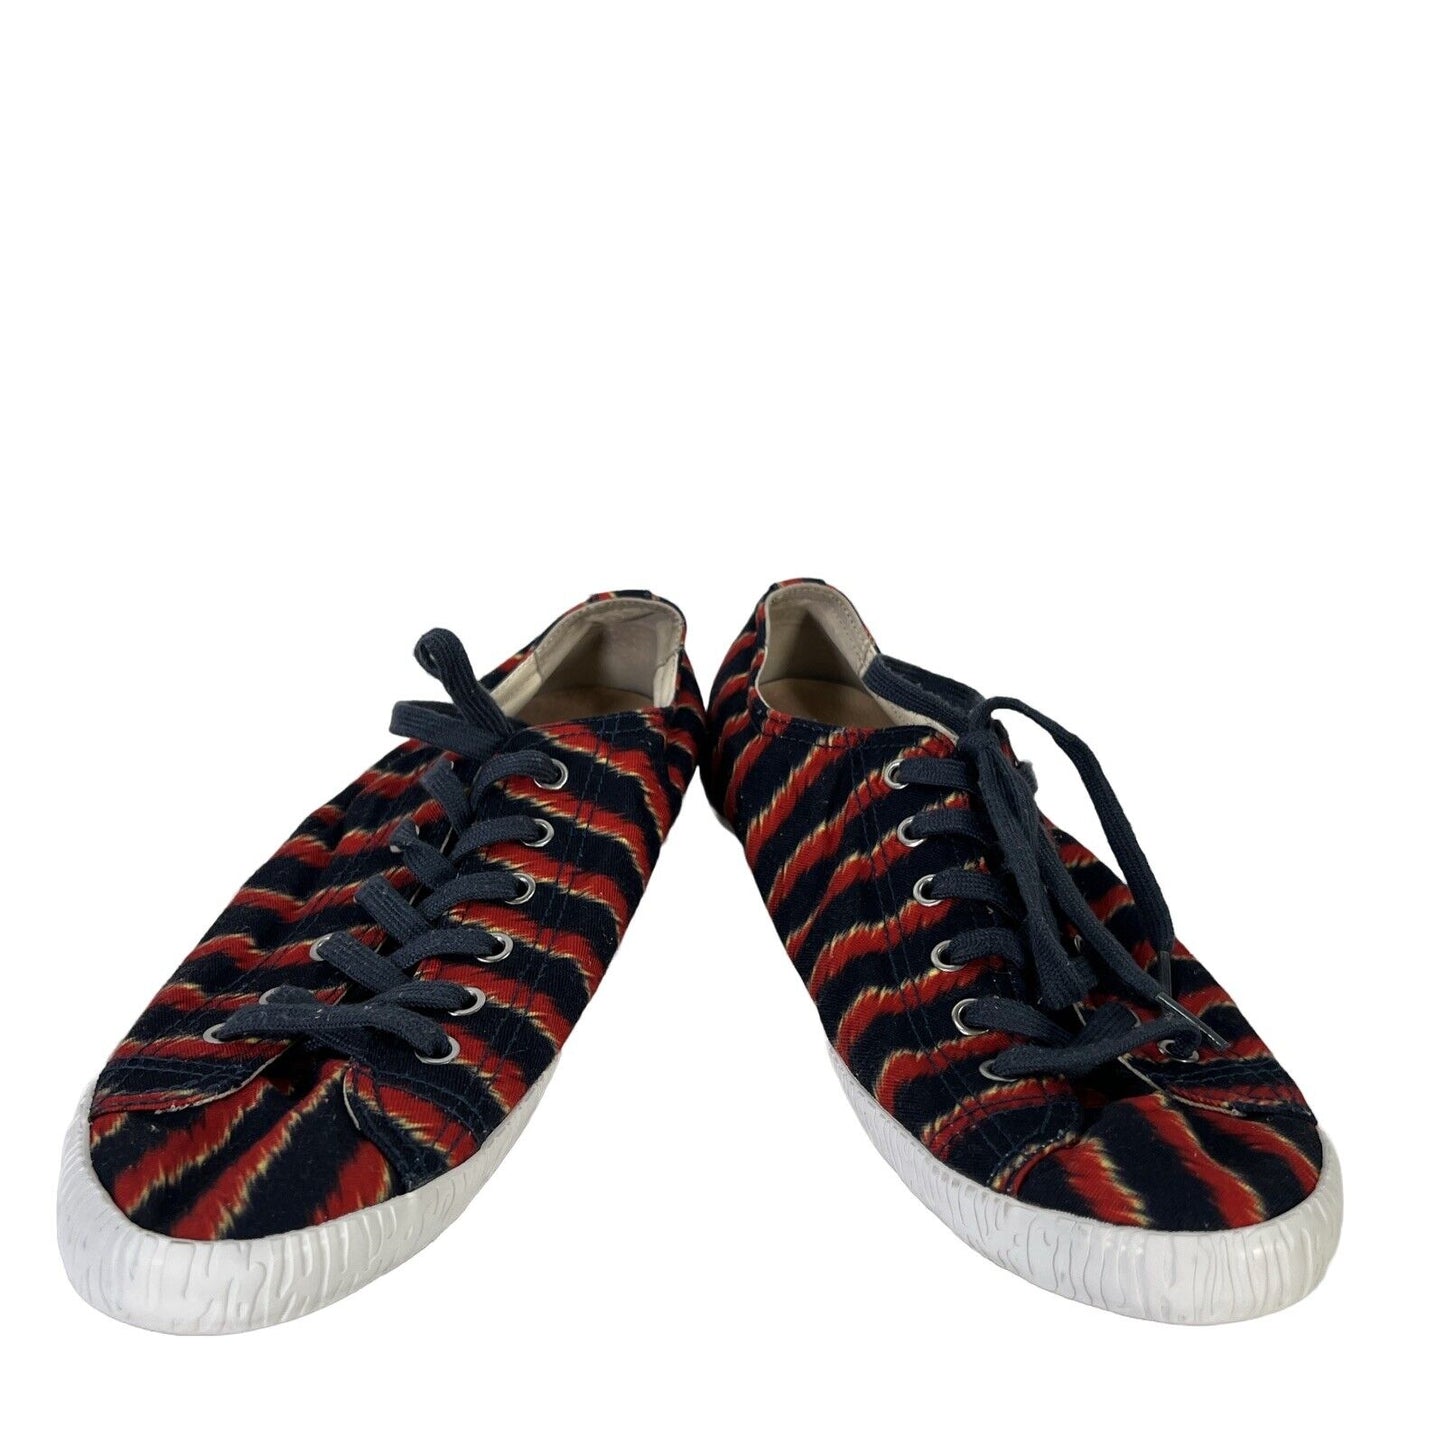 Kenzo Men's Red/Blue Striped Diego Canvas Low Top Sneakers - 44/ US 11